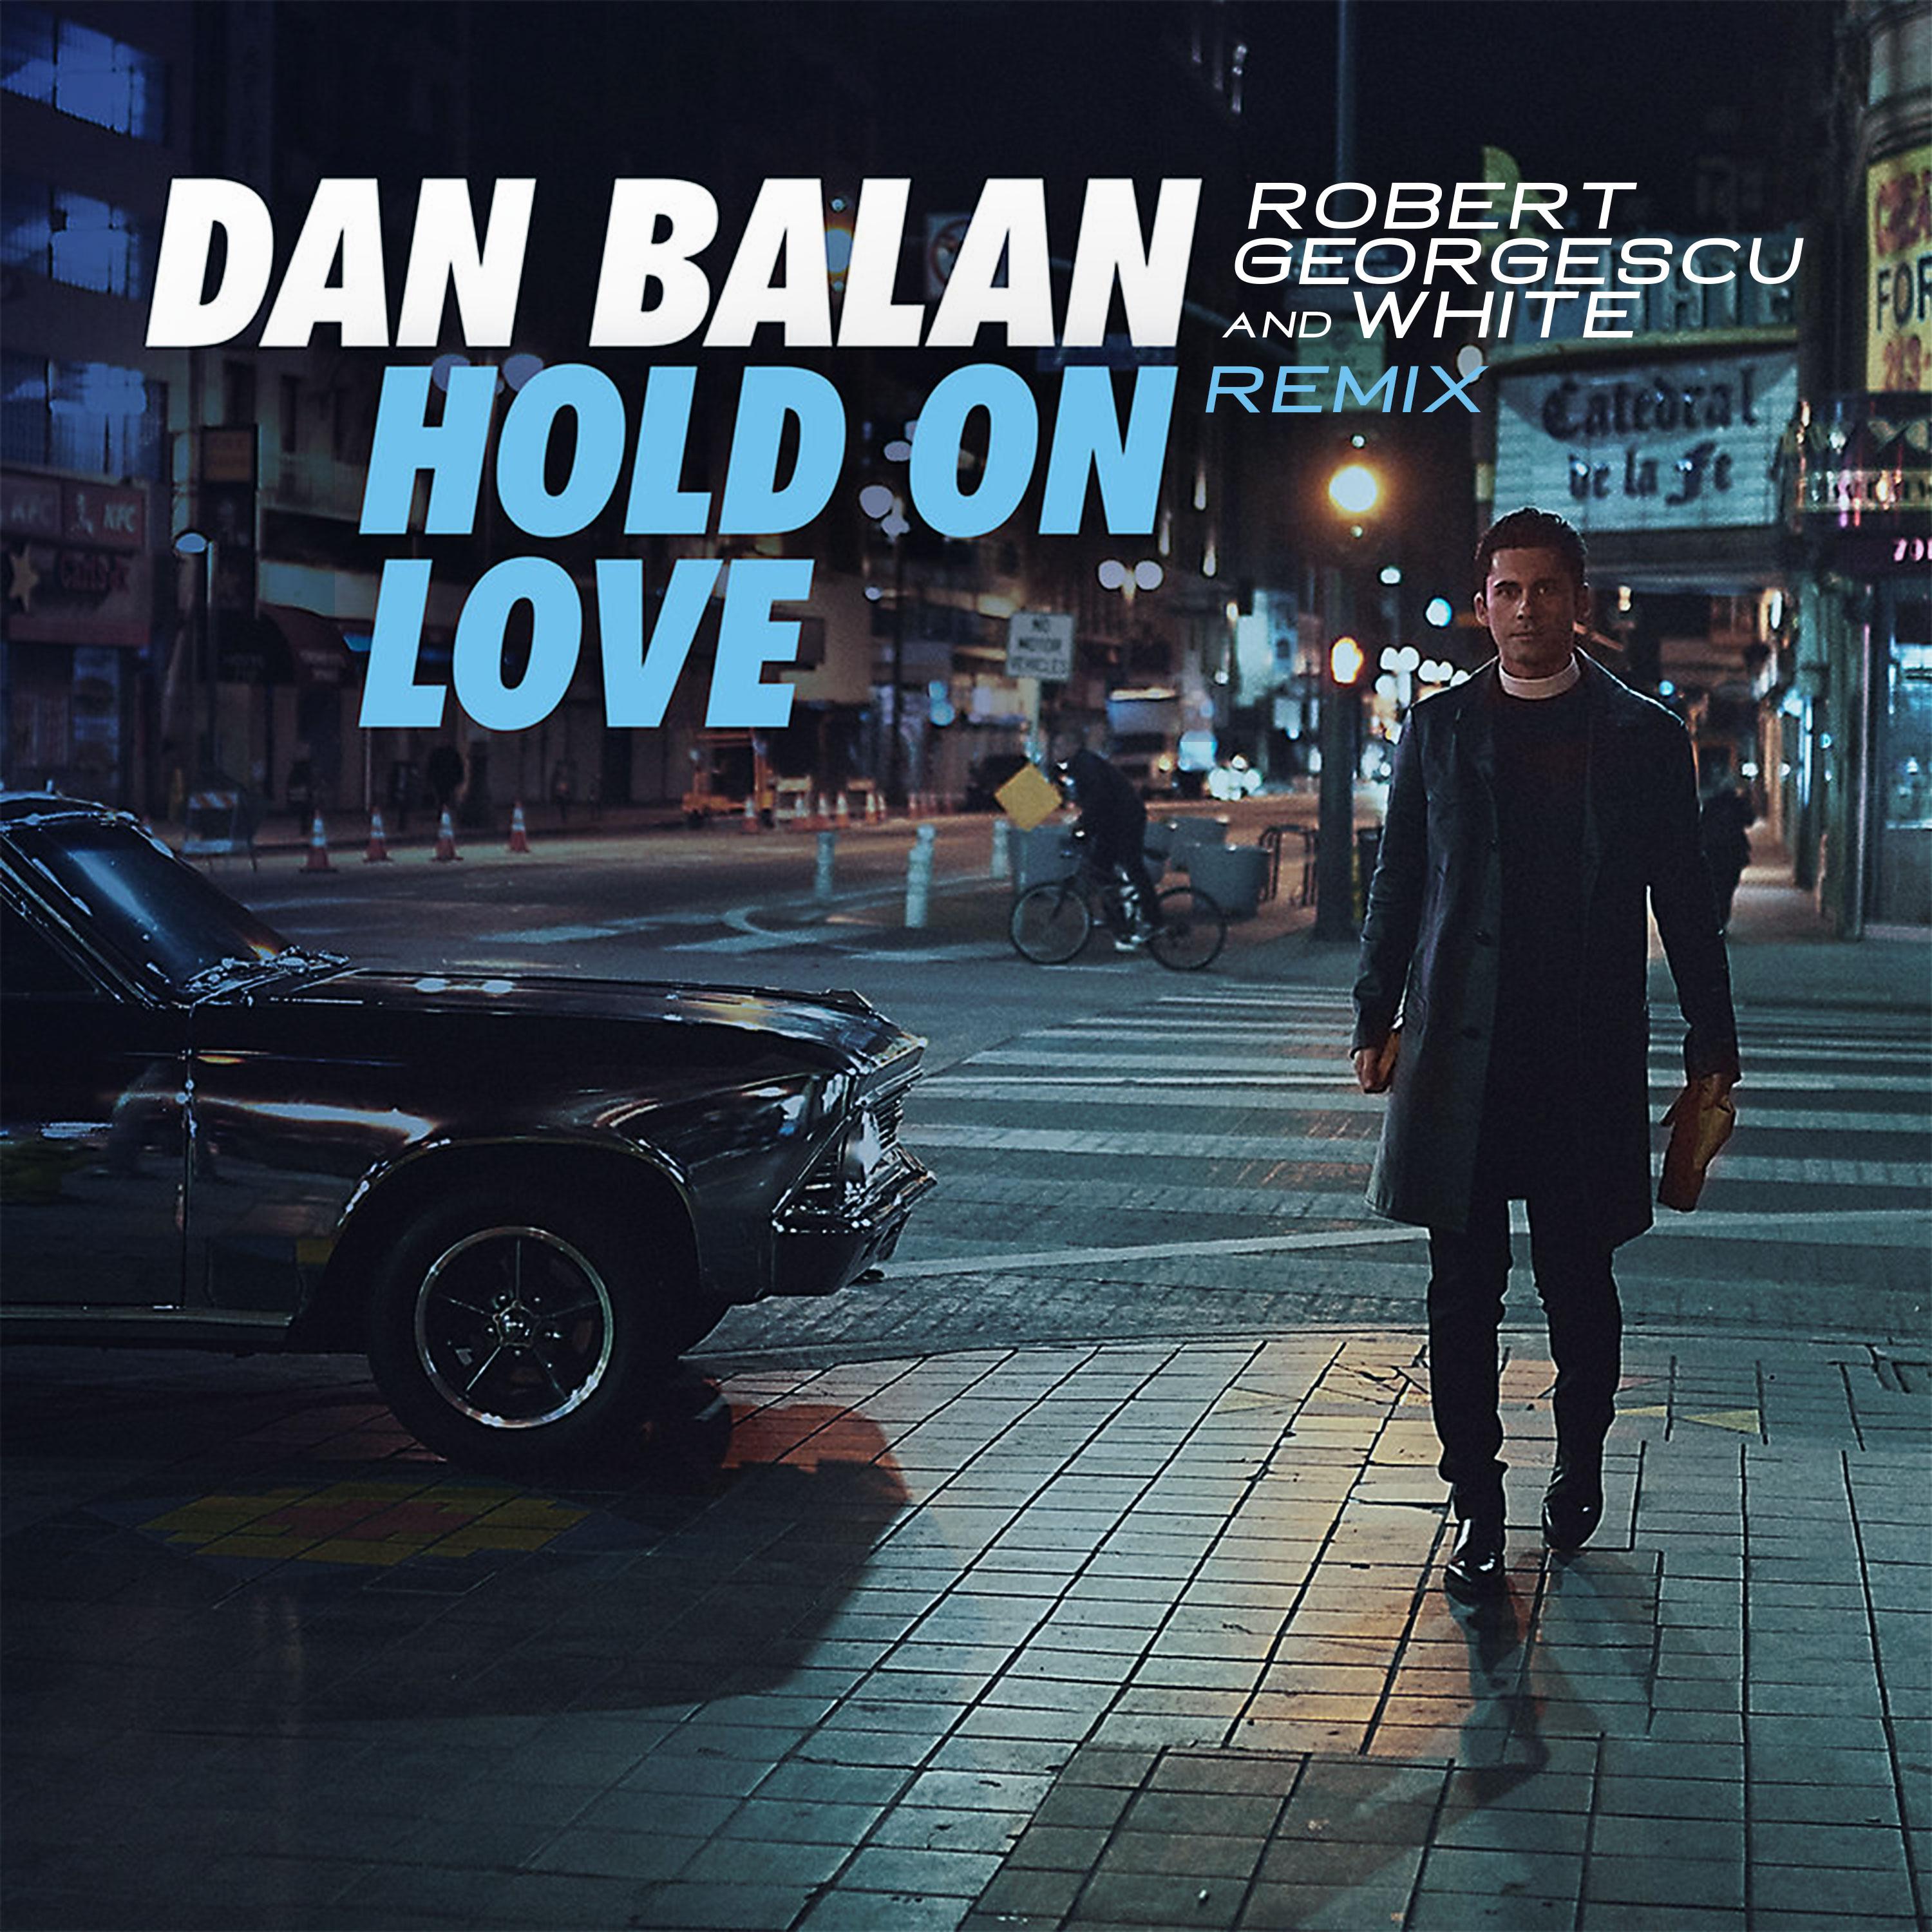 Dan Bălan - Hold on Love (Robert Georgescu and White Extended Remix)